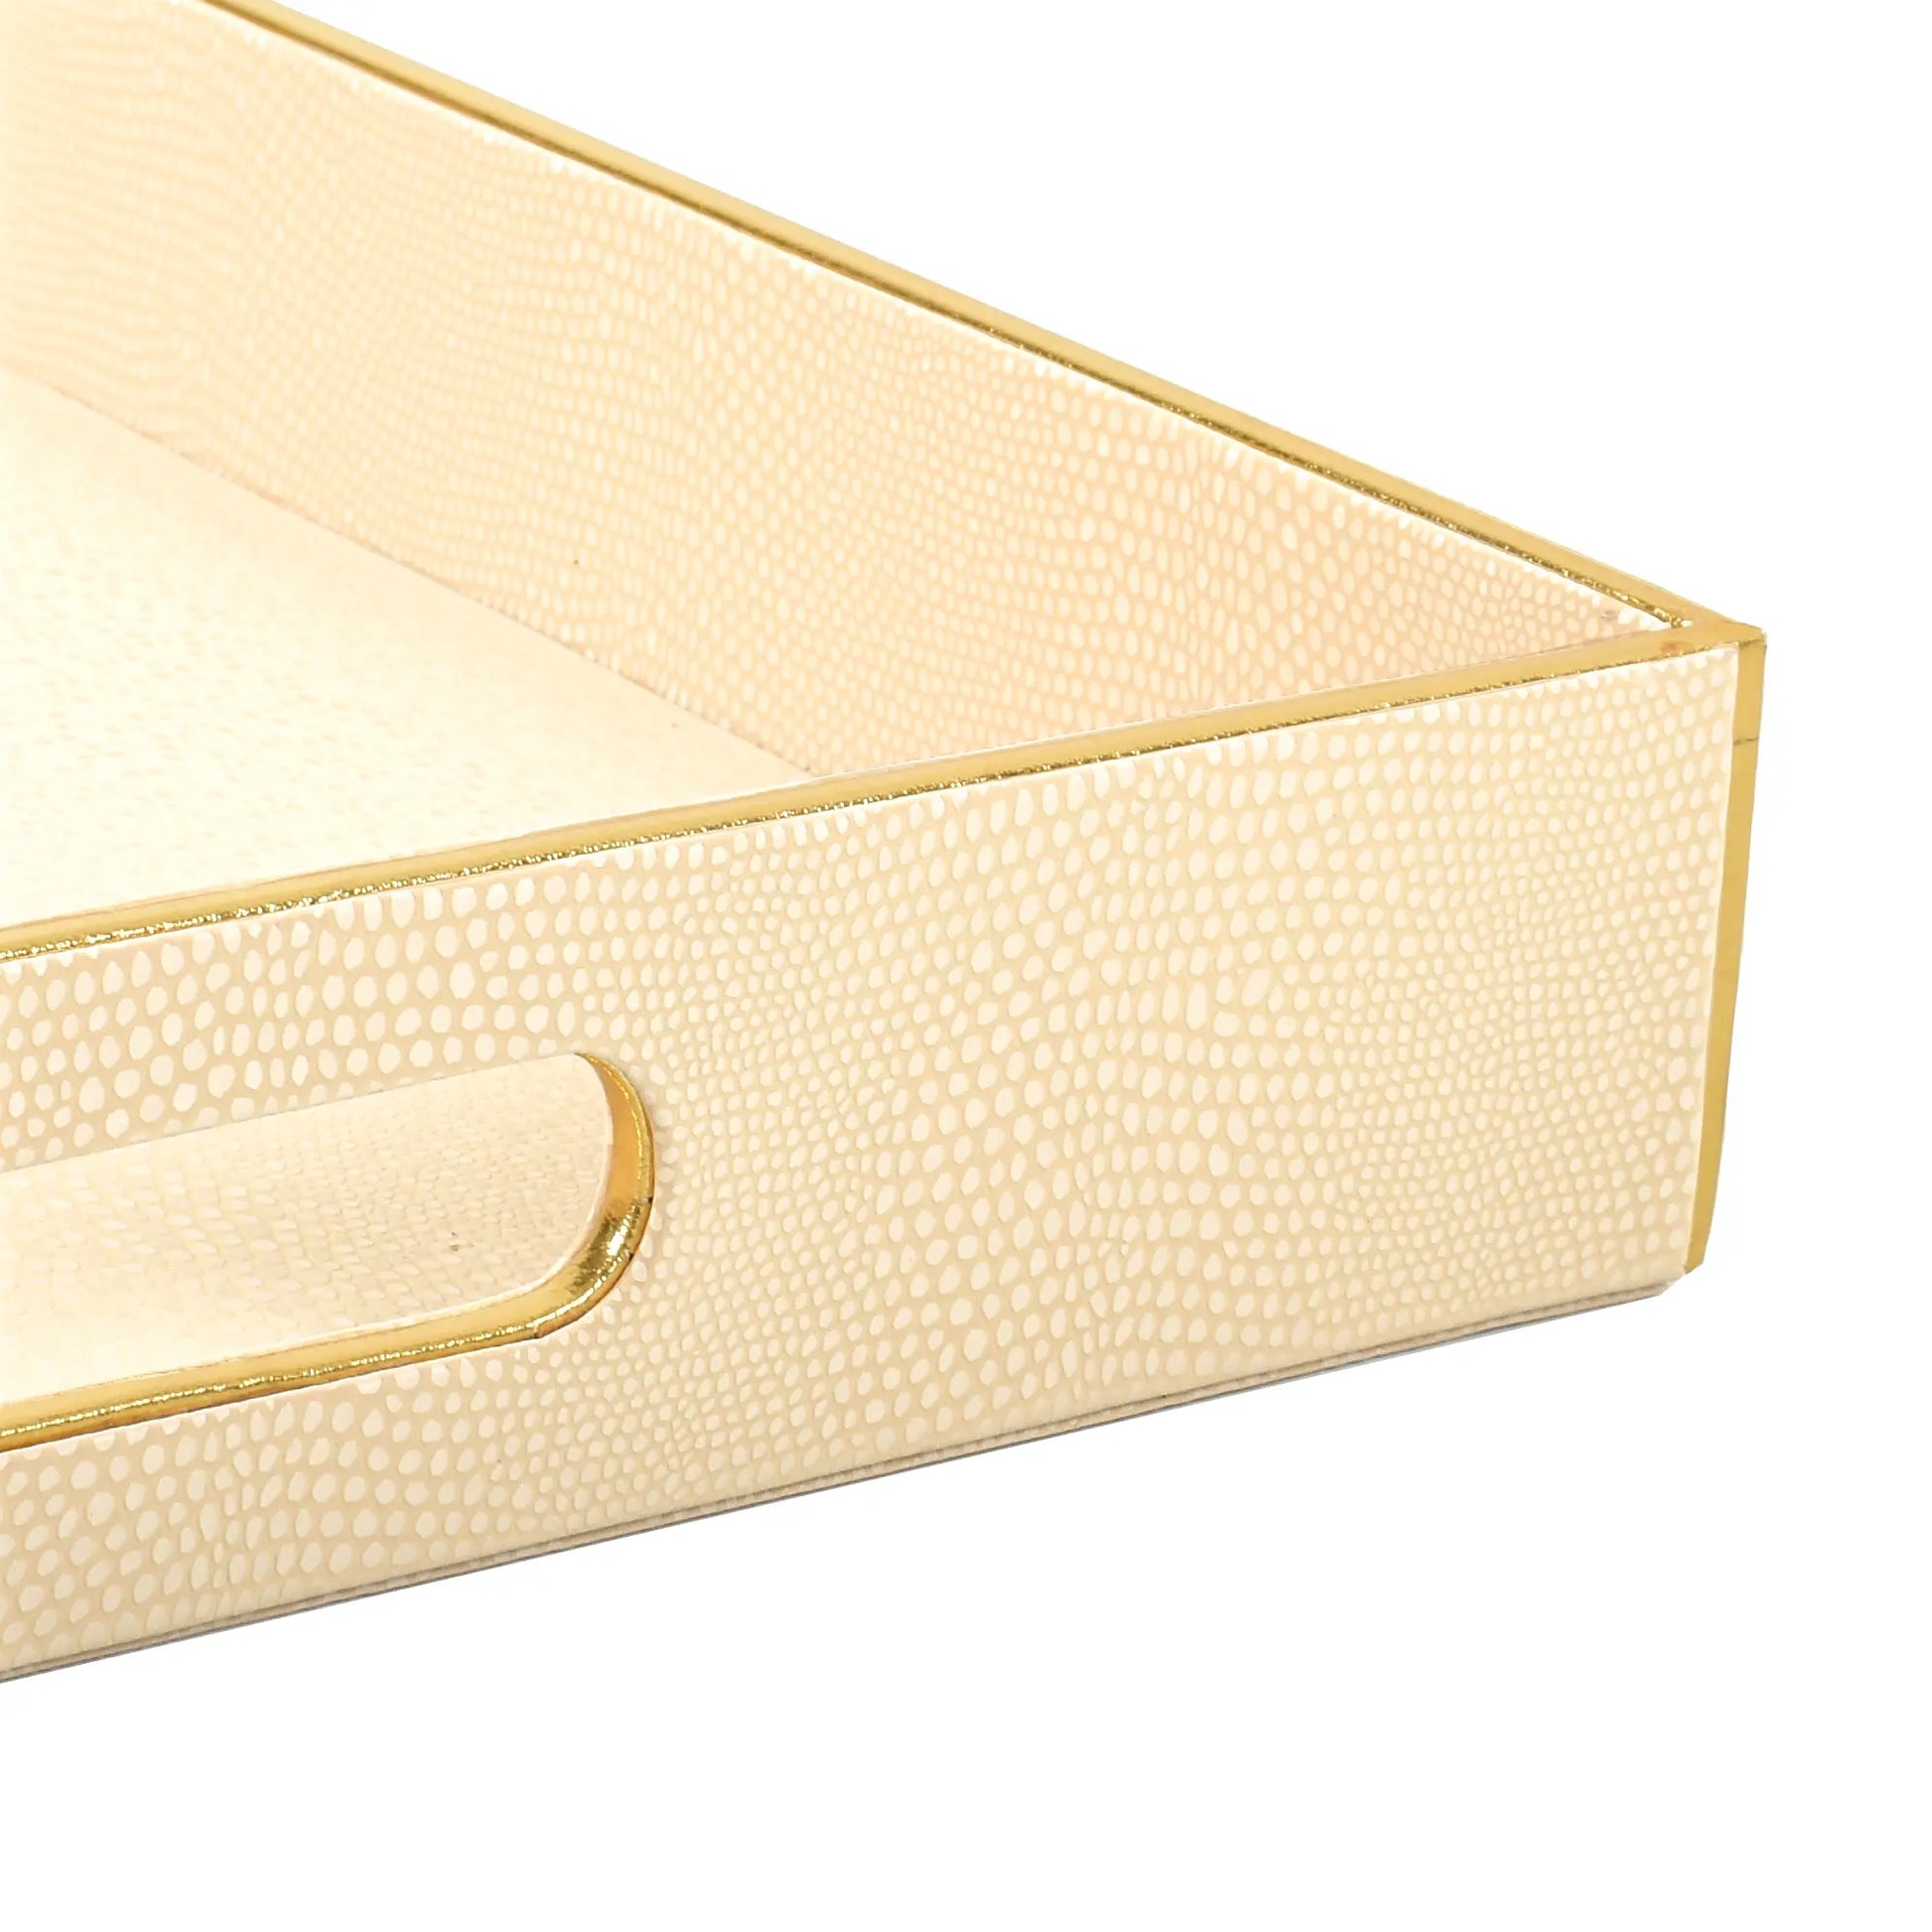 Leatherette Square Serving Tray Set of 2 | Ivory | Serpentine Ichkan